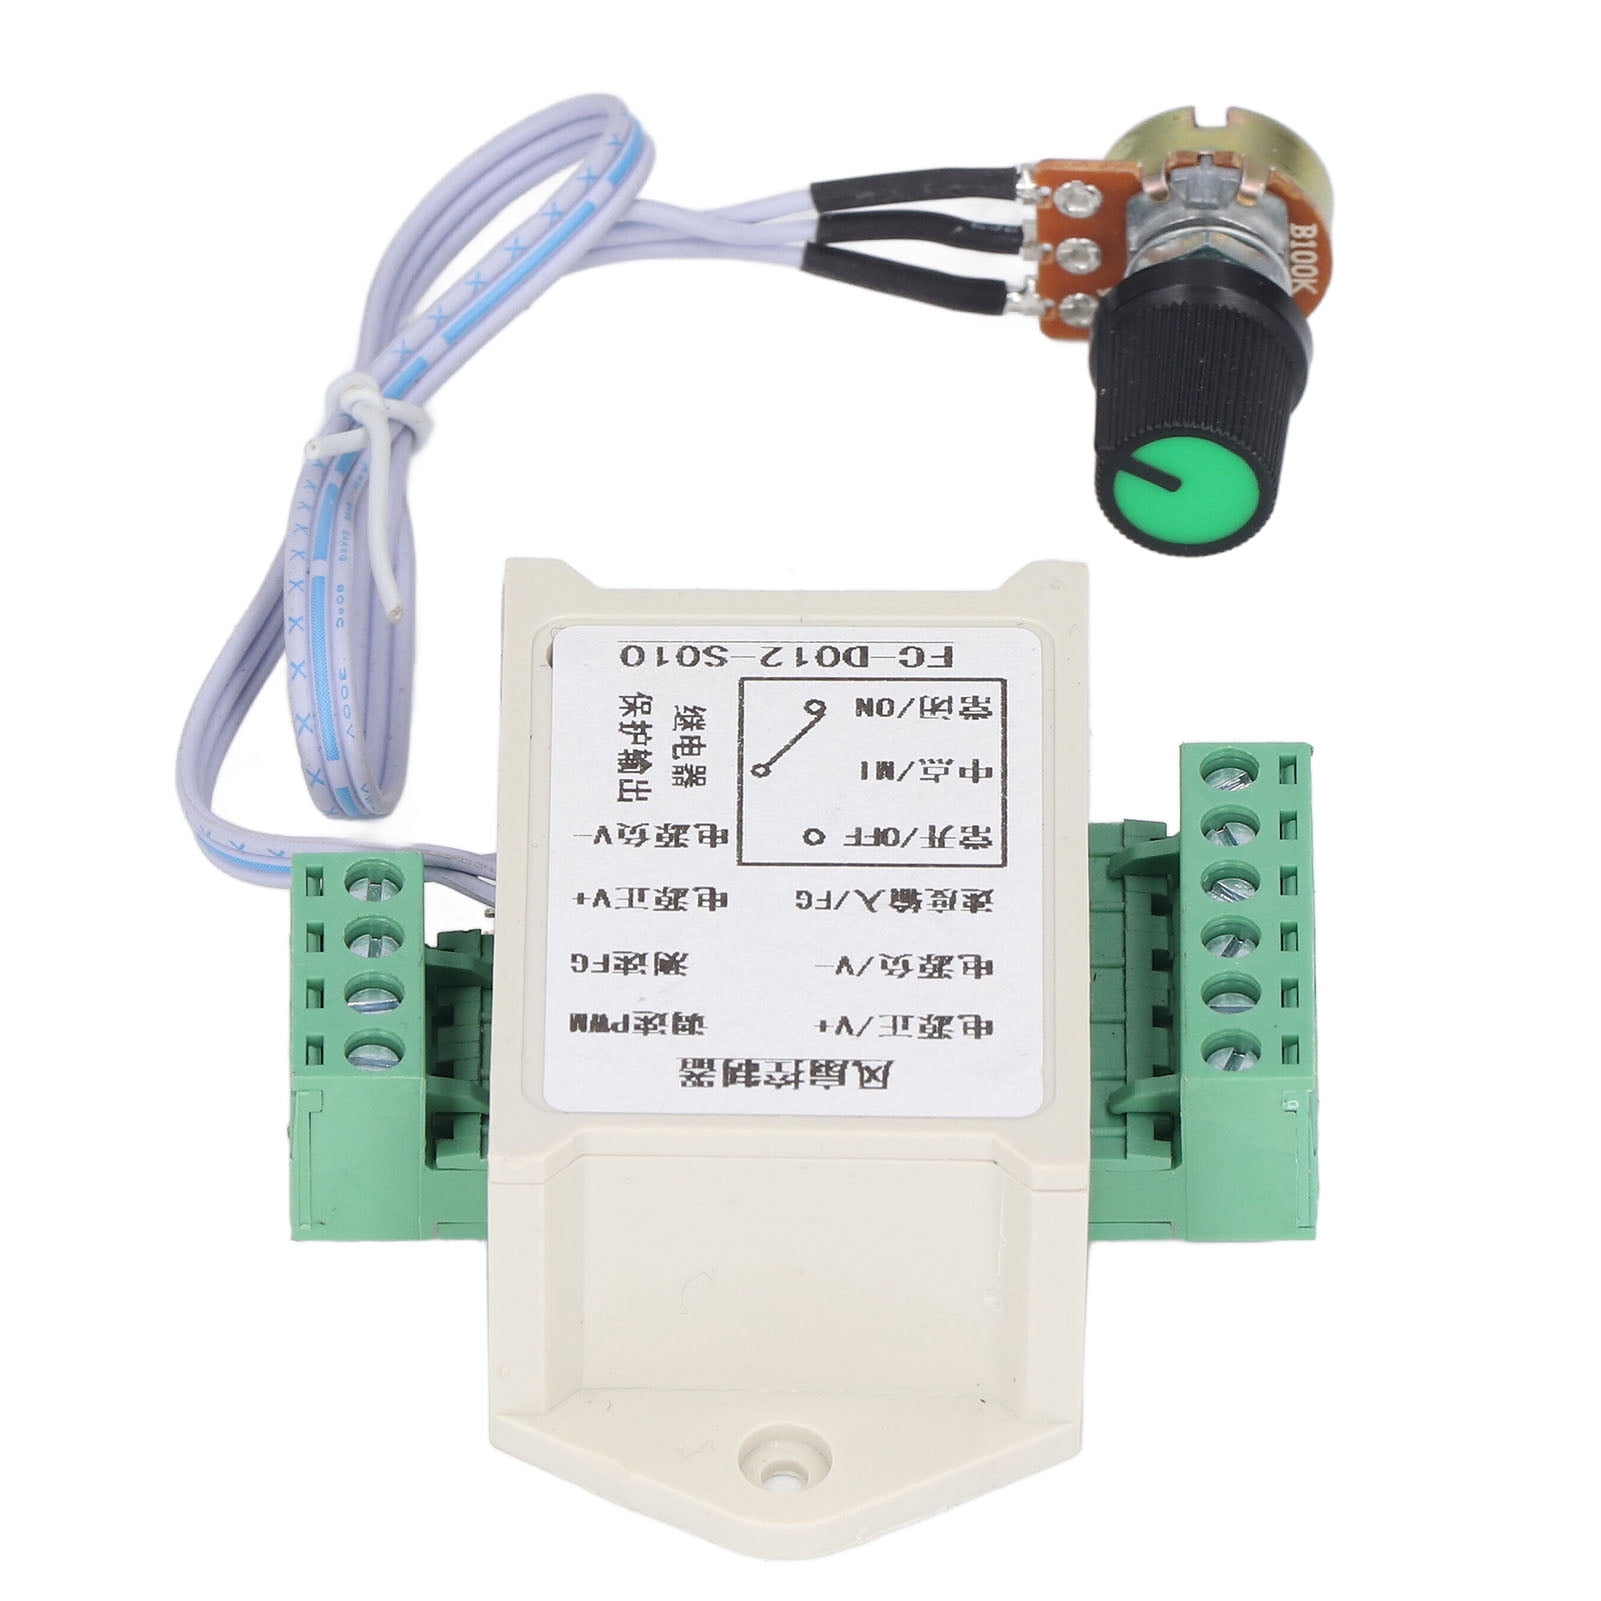 12V Fan Controller, V+ GND FG PWM Motor Regulator 6P 5.08mm Power Interface Relay Output For Computer Heat For Industrial Cooling - Walmart.com